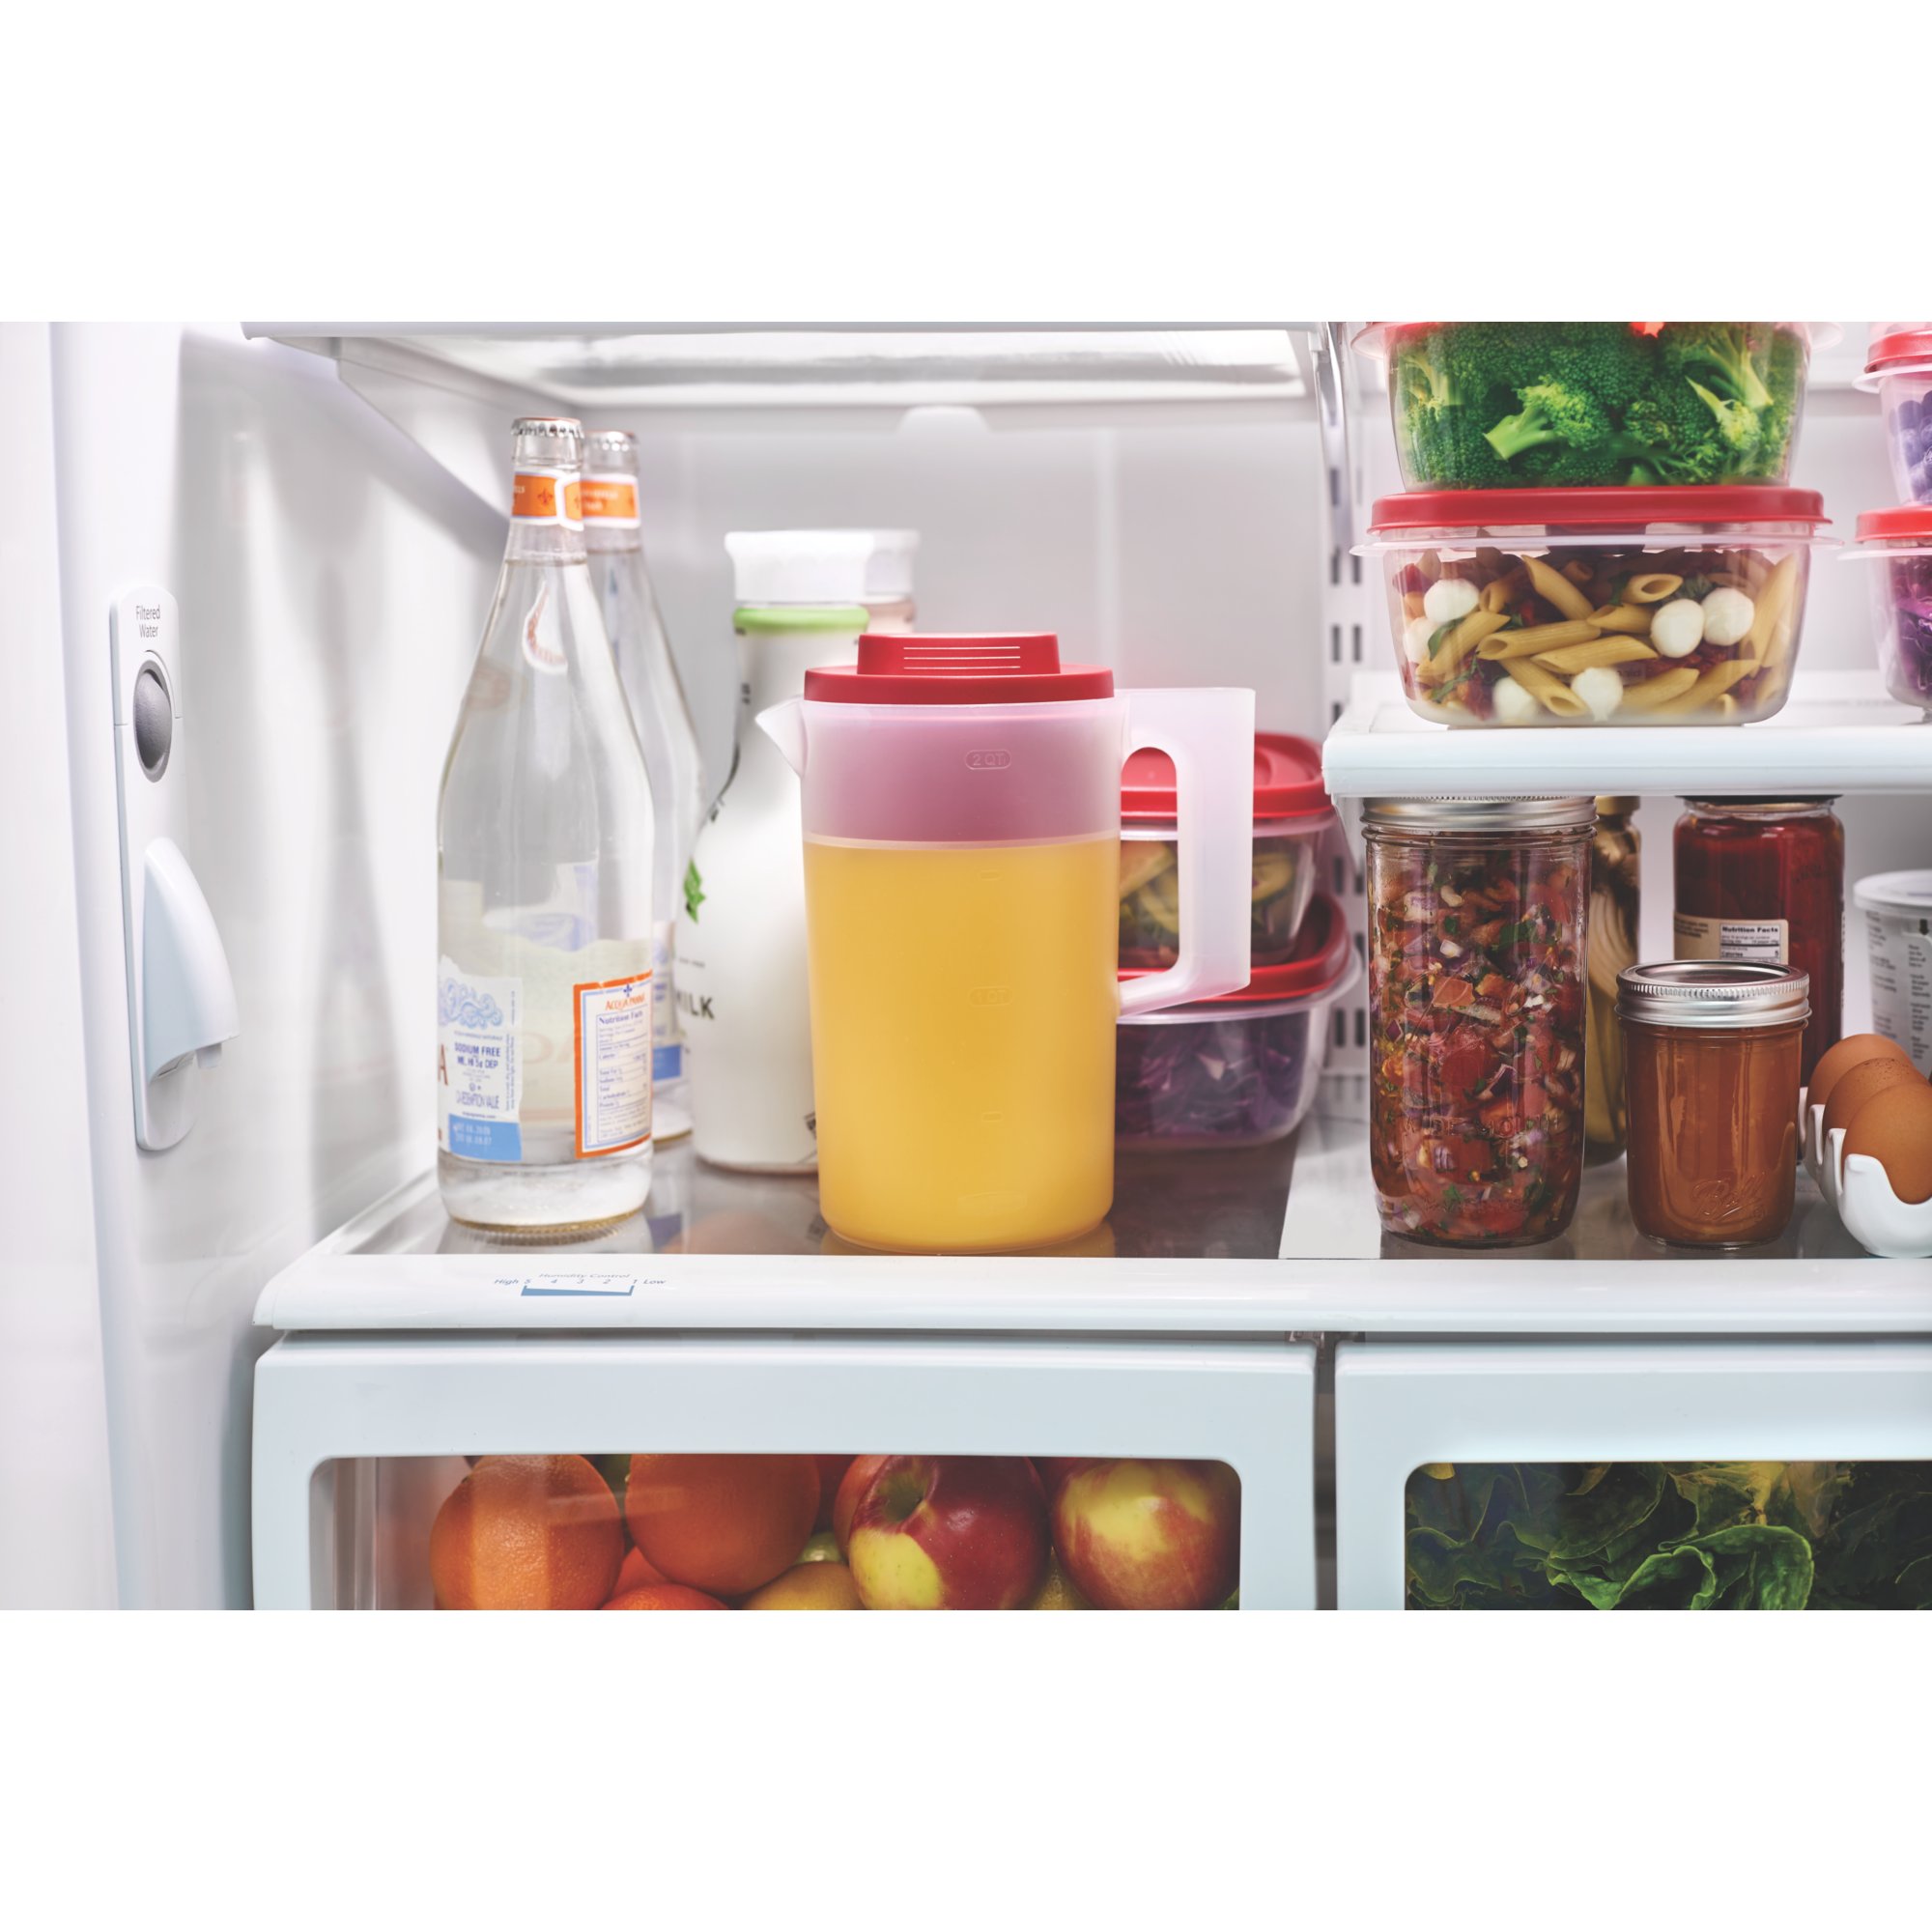 https://s7d9.scene7.com/is/image/NewellRubbermaid/2122587-rubbermaid-food-storage-simply-pour-pitcher-2qt-red-refrigerator-with-food-lifestyle?wid=2000&hei=2000